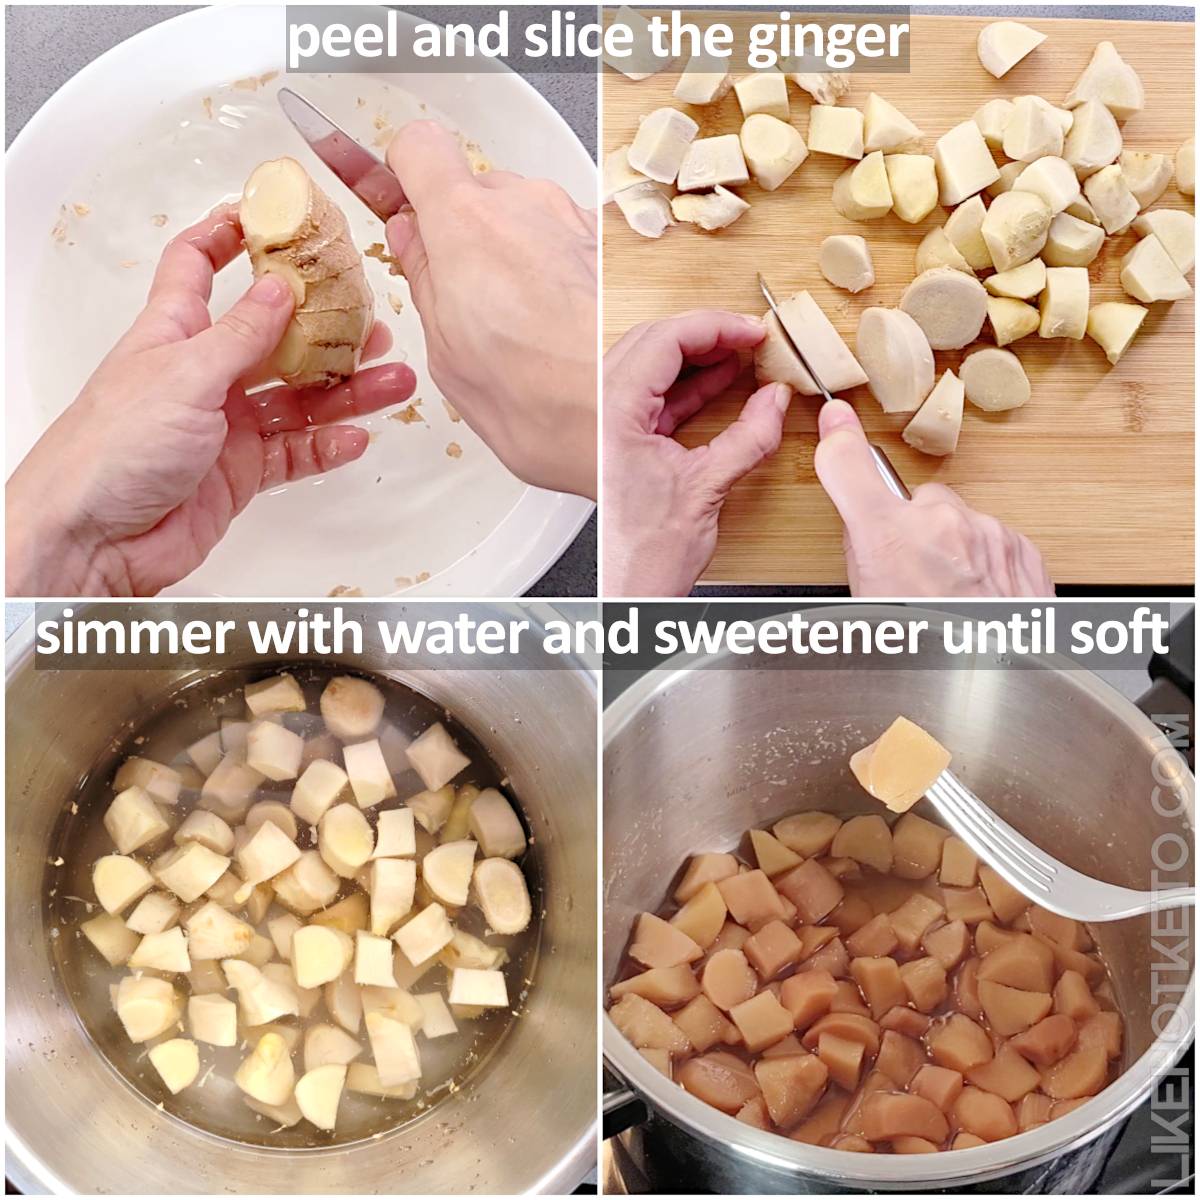 Making preserved ginger without sugar, step by step.